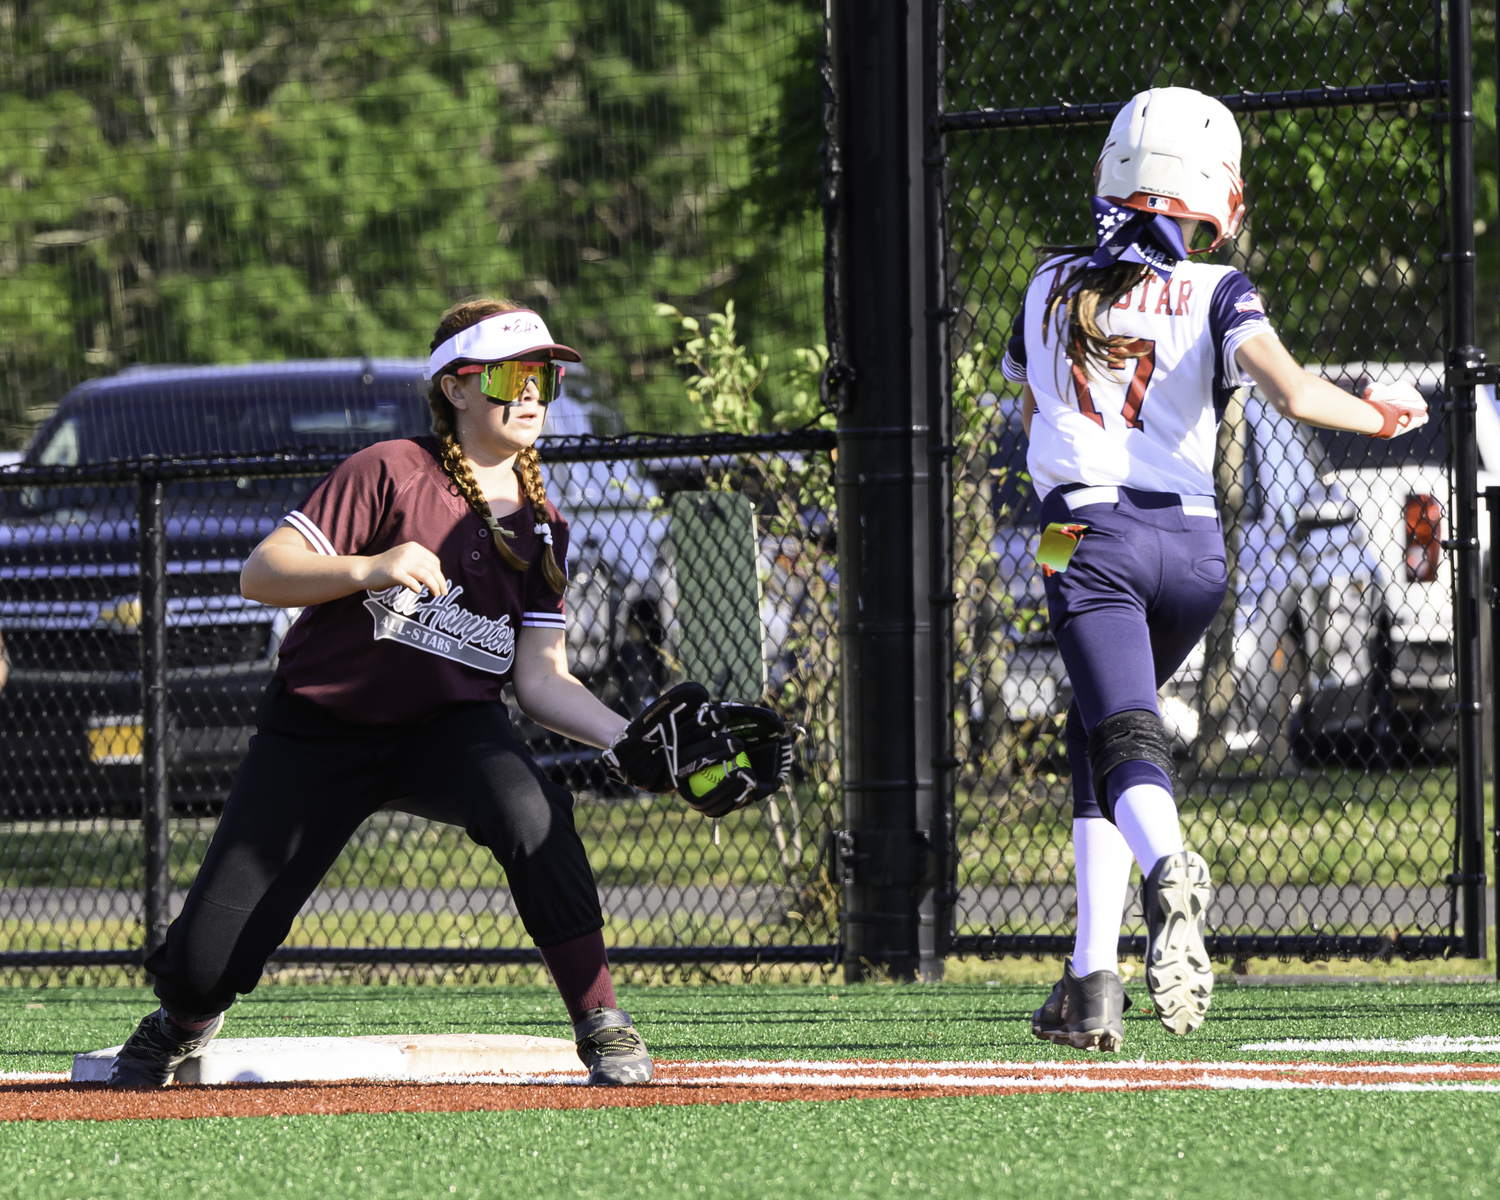 Siena Kinney catches a throw at first base. MARIANNE BARNETT